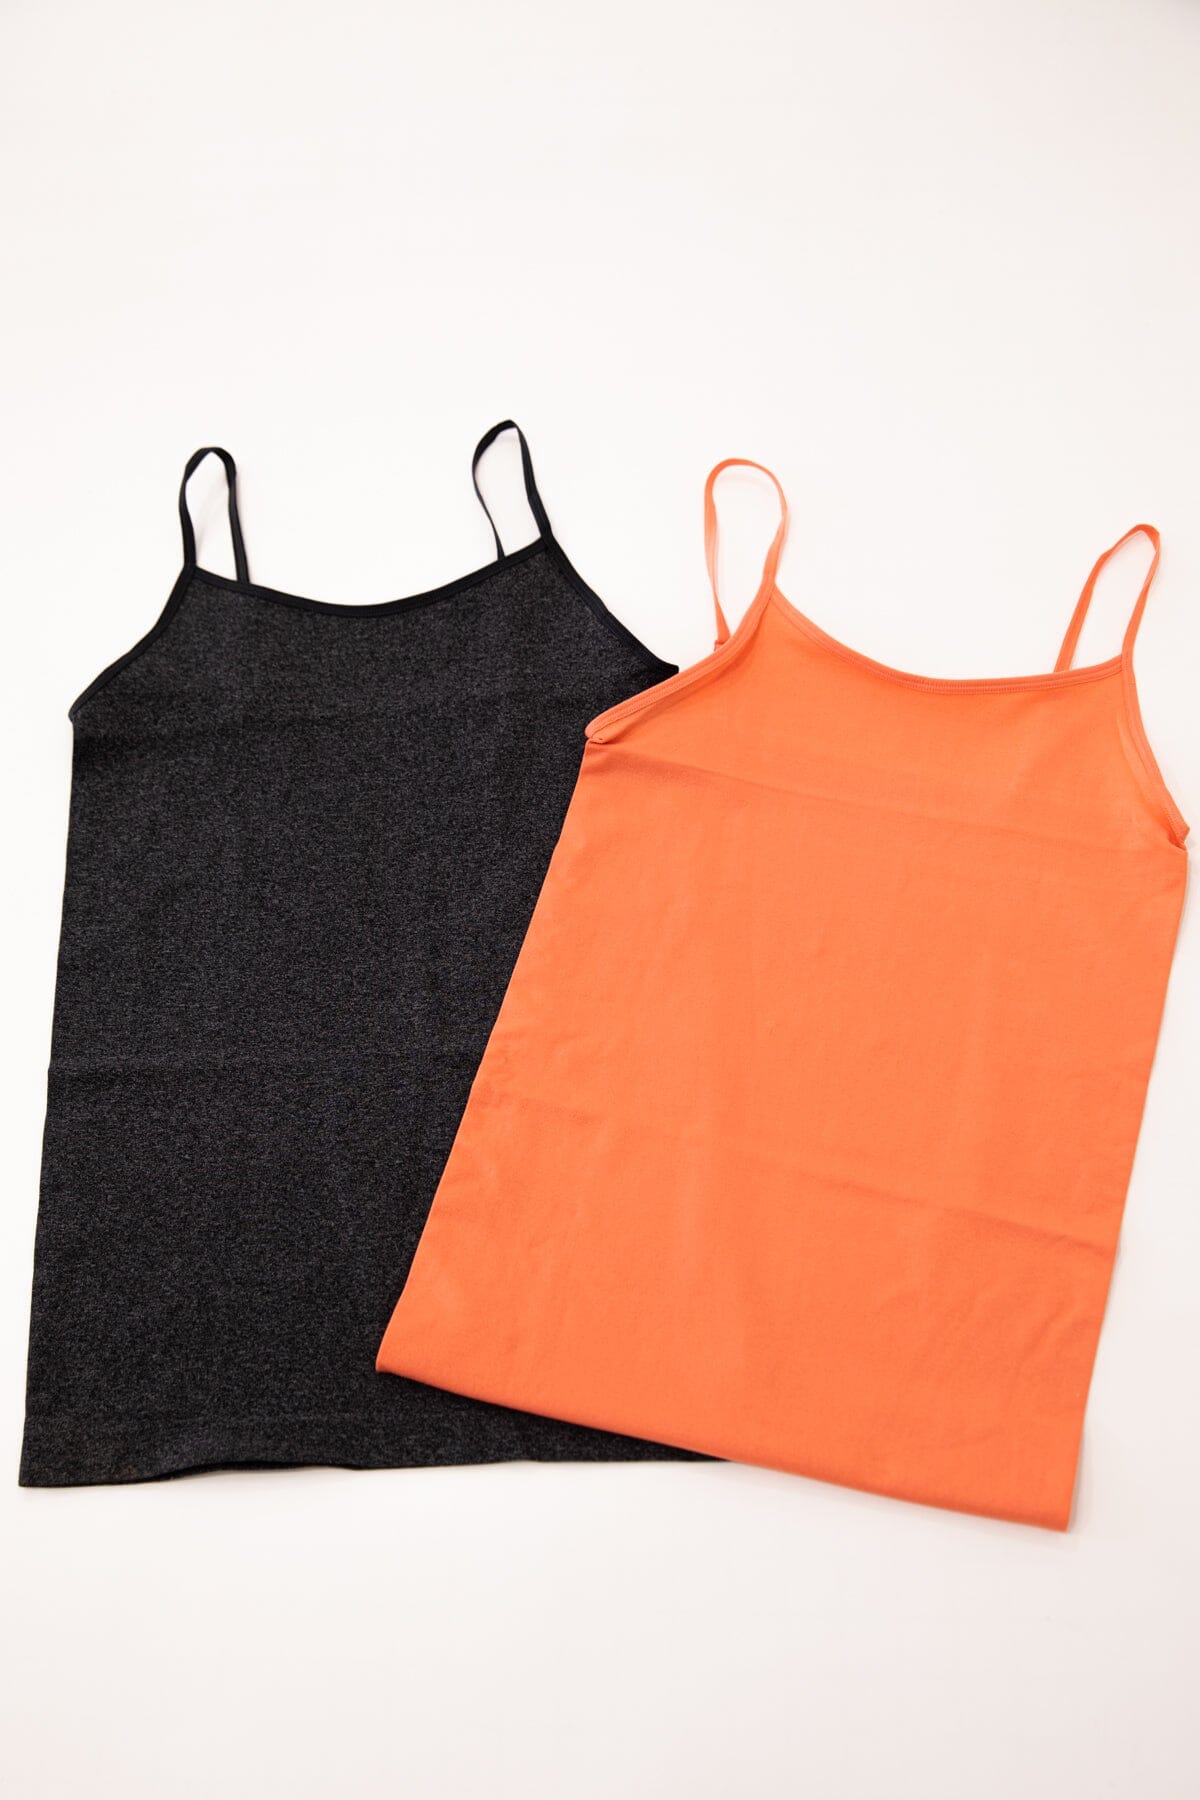 Charcoal and Coral Seamless Tank Bundle - Filly Flair